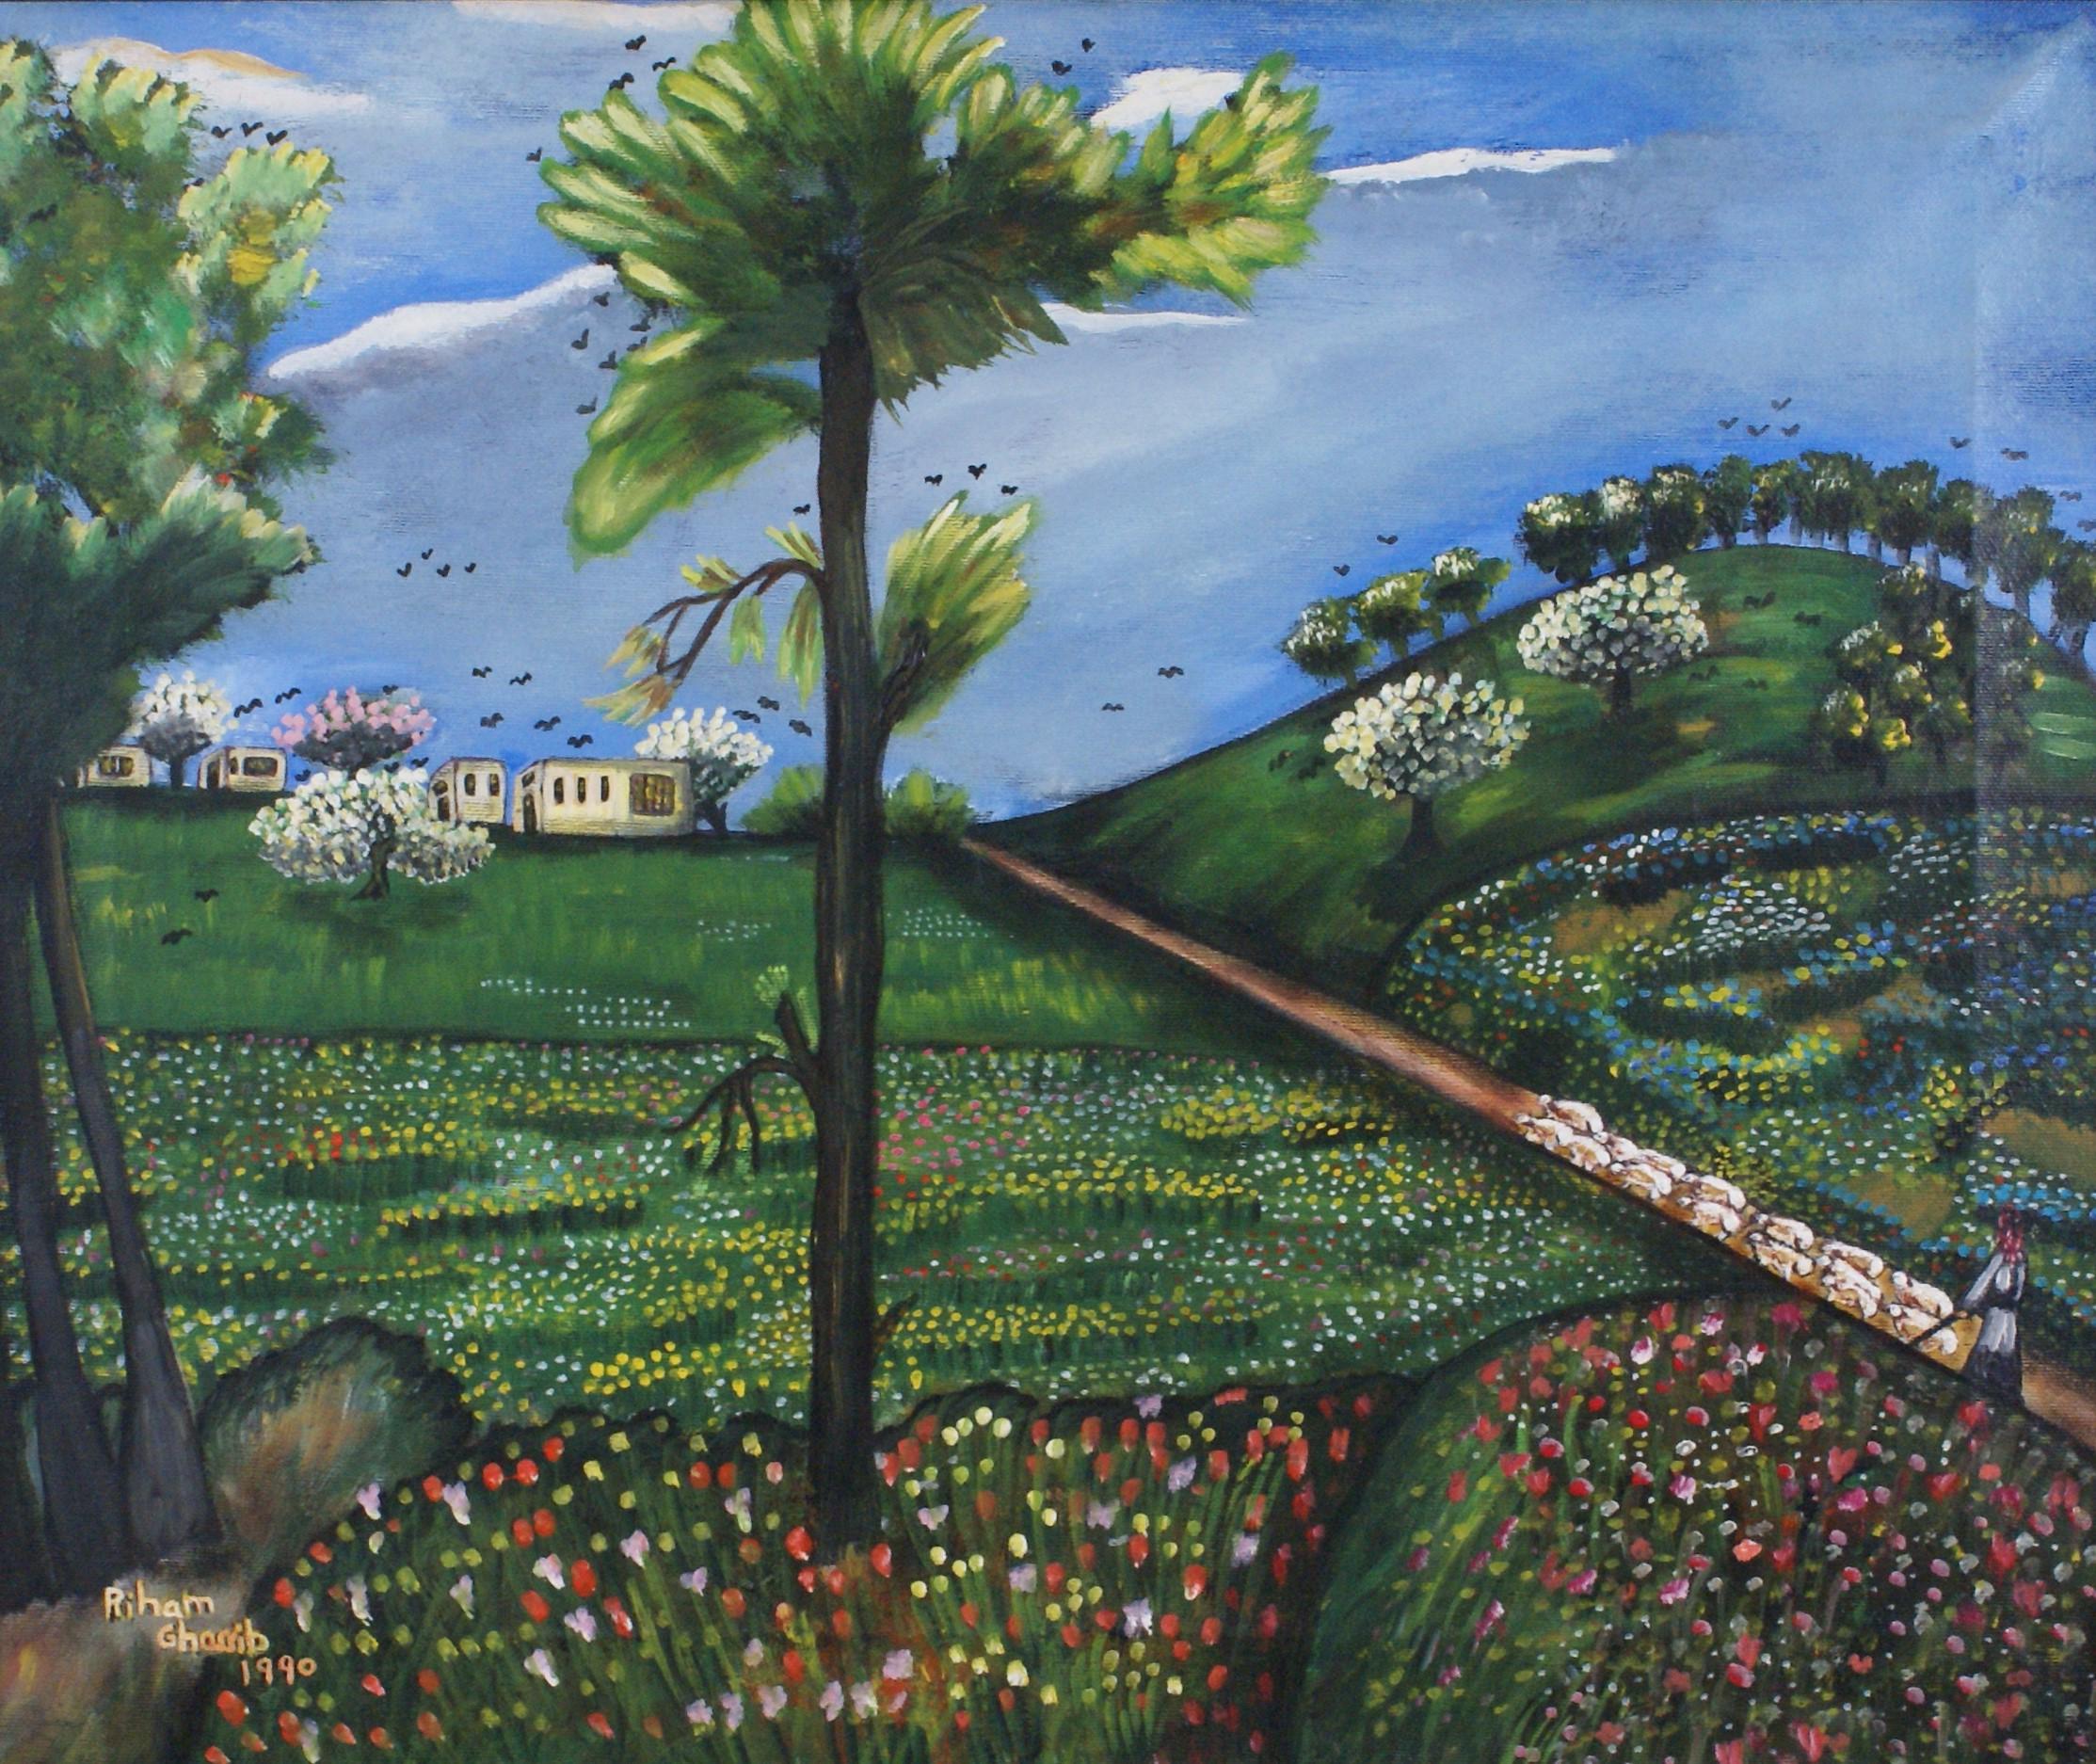 Spring in Baqa'a - Painting by Riham Ghassib